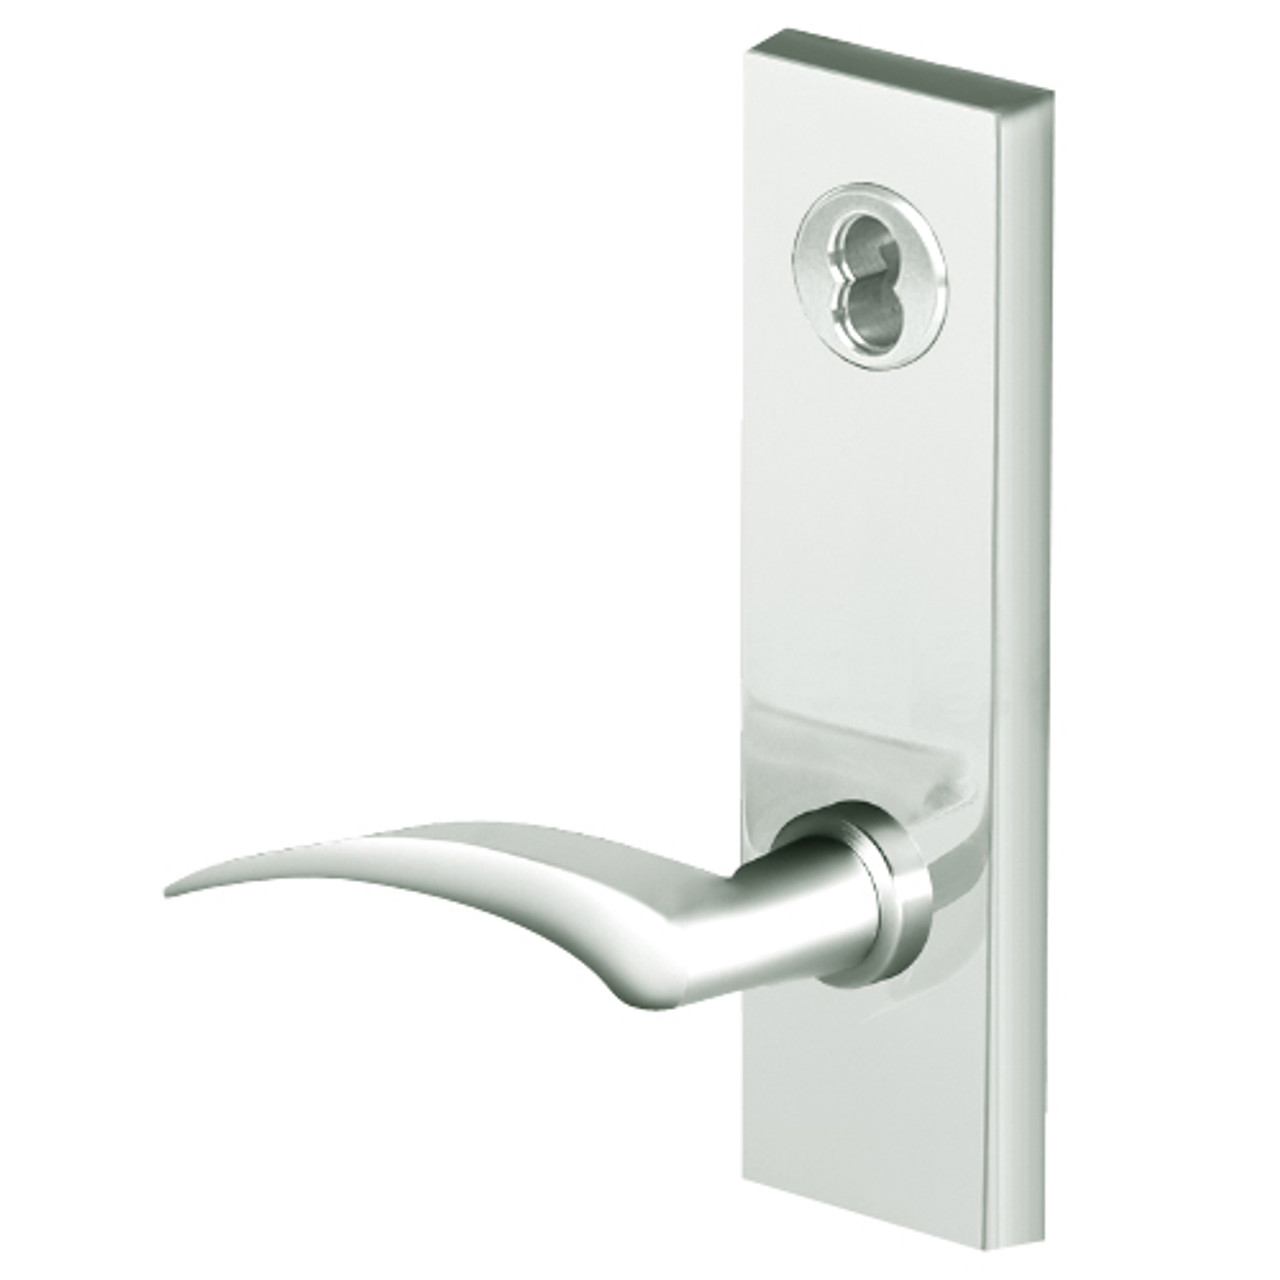 45H7INA17RM618 Best 40H Series Intruder with Deadbolt Heavy Duty Mortise Lever  Lock with Gull Wing RH in Bright Nickel Lock Depot Inc